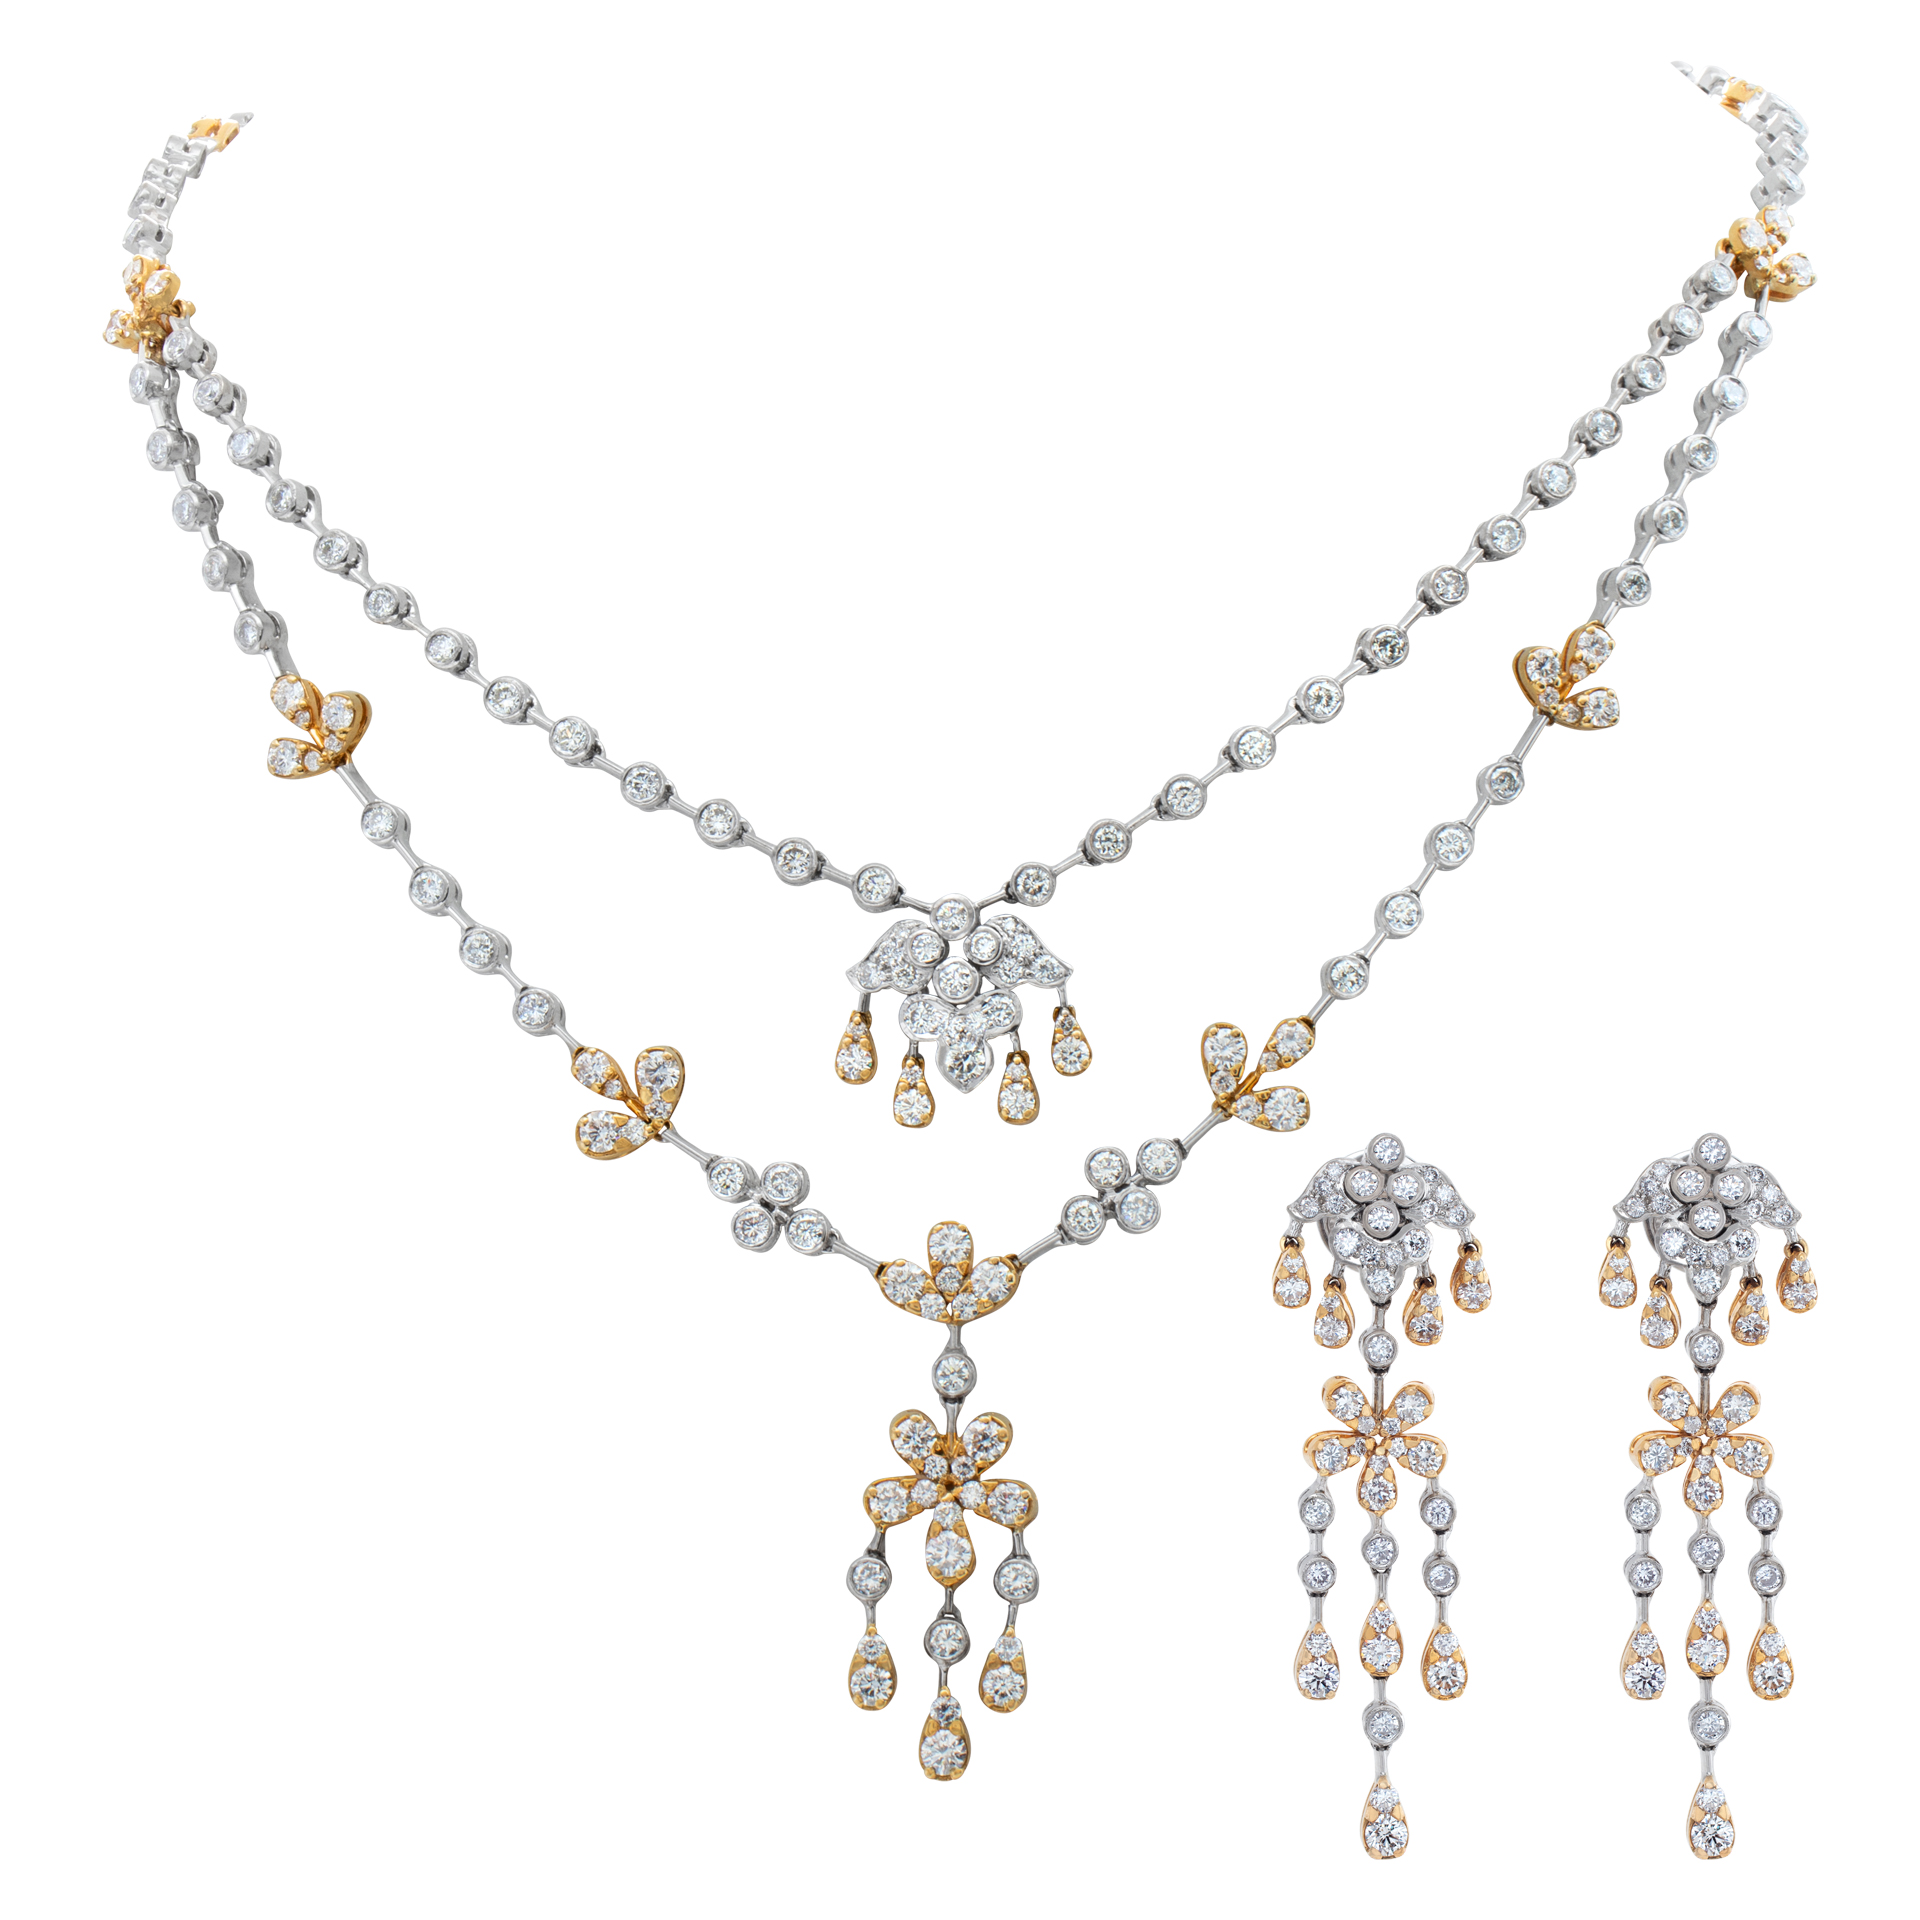 Diamonds necklace and earrings parure, set in 18k white and yellow gold. Round brilliant cut diamonds total approximate weight: 14.60 carats